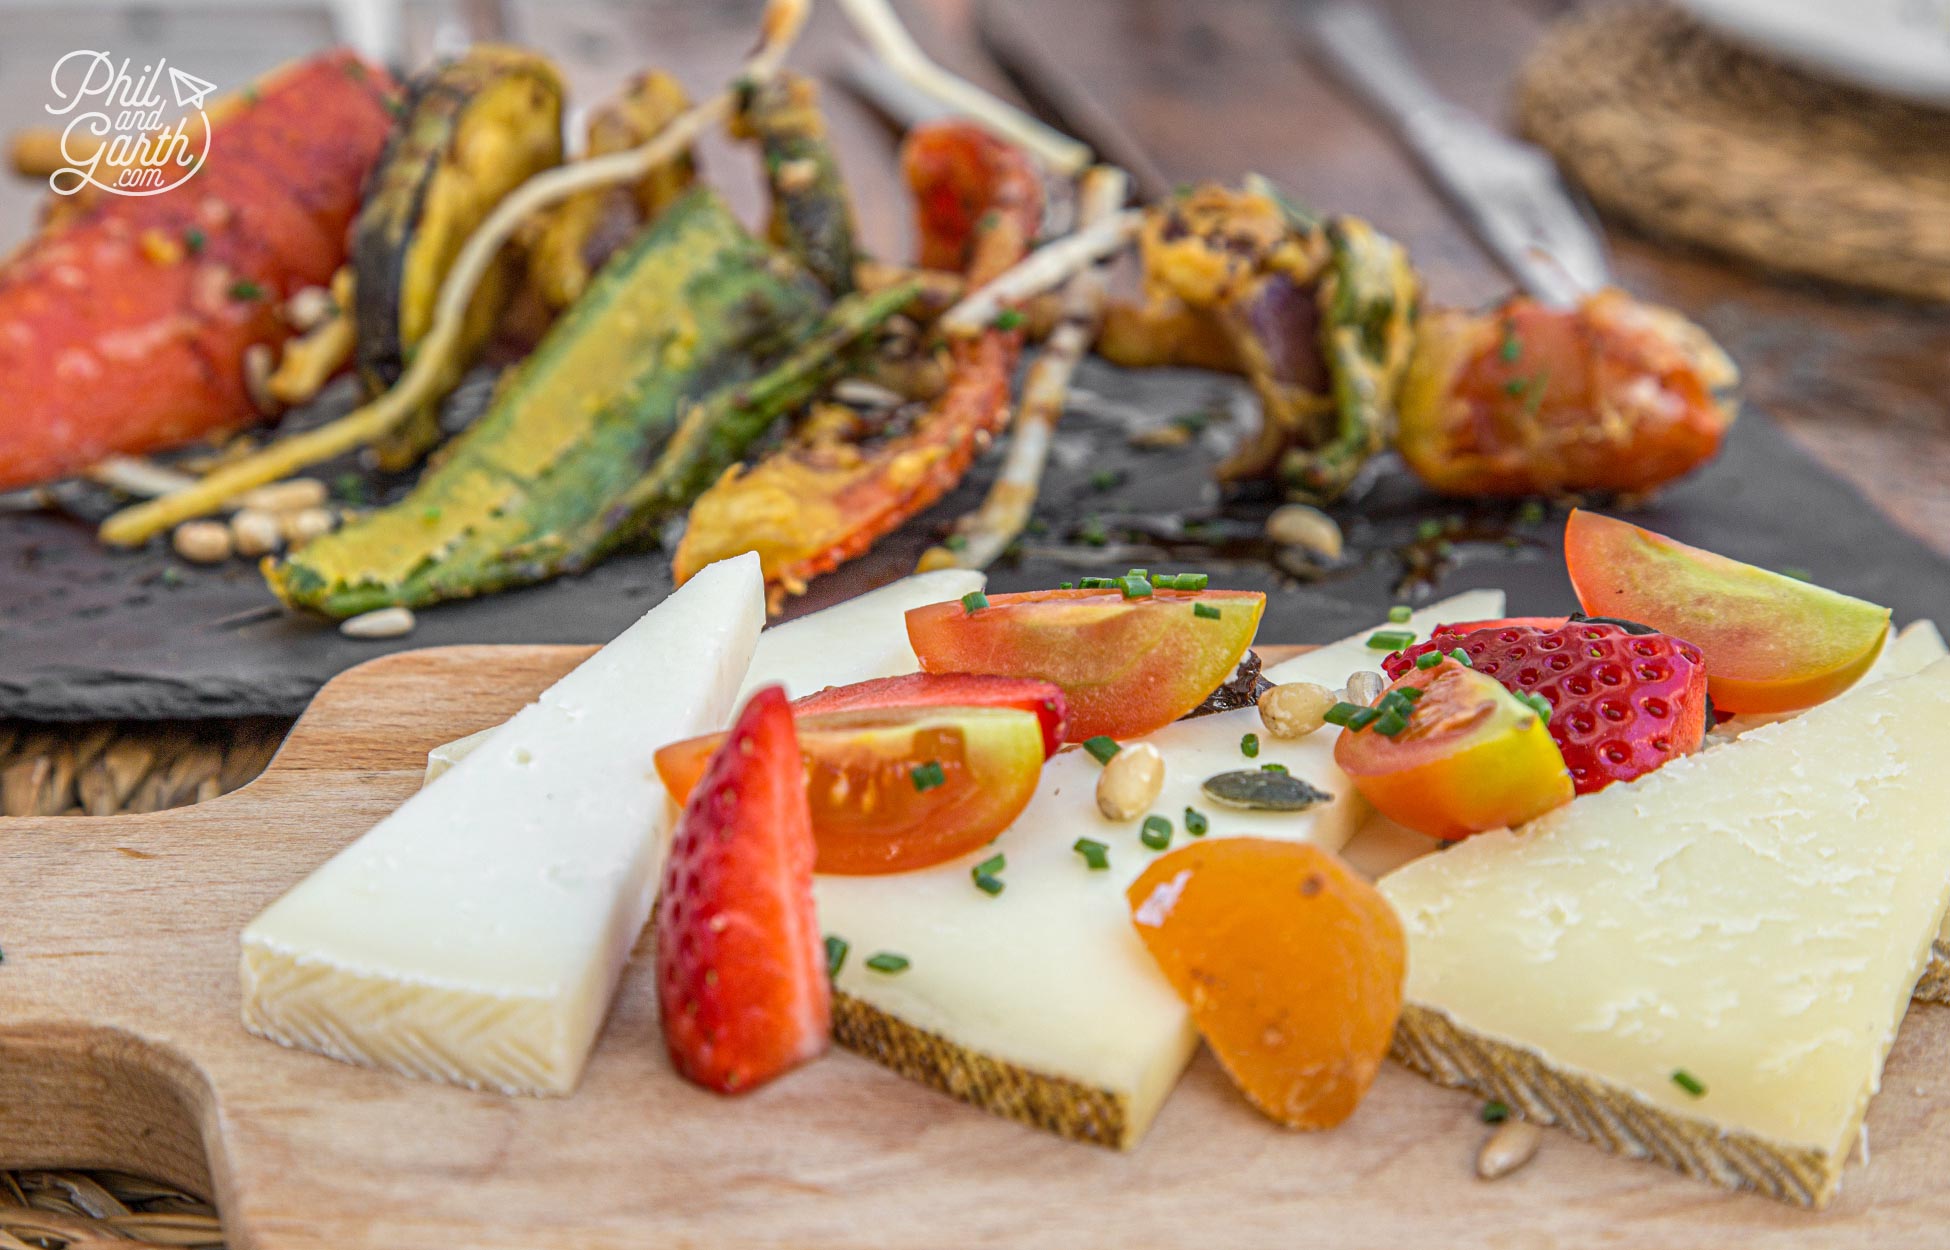 Delicious chargrilled vegetables and cheeses at The Farm